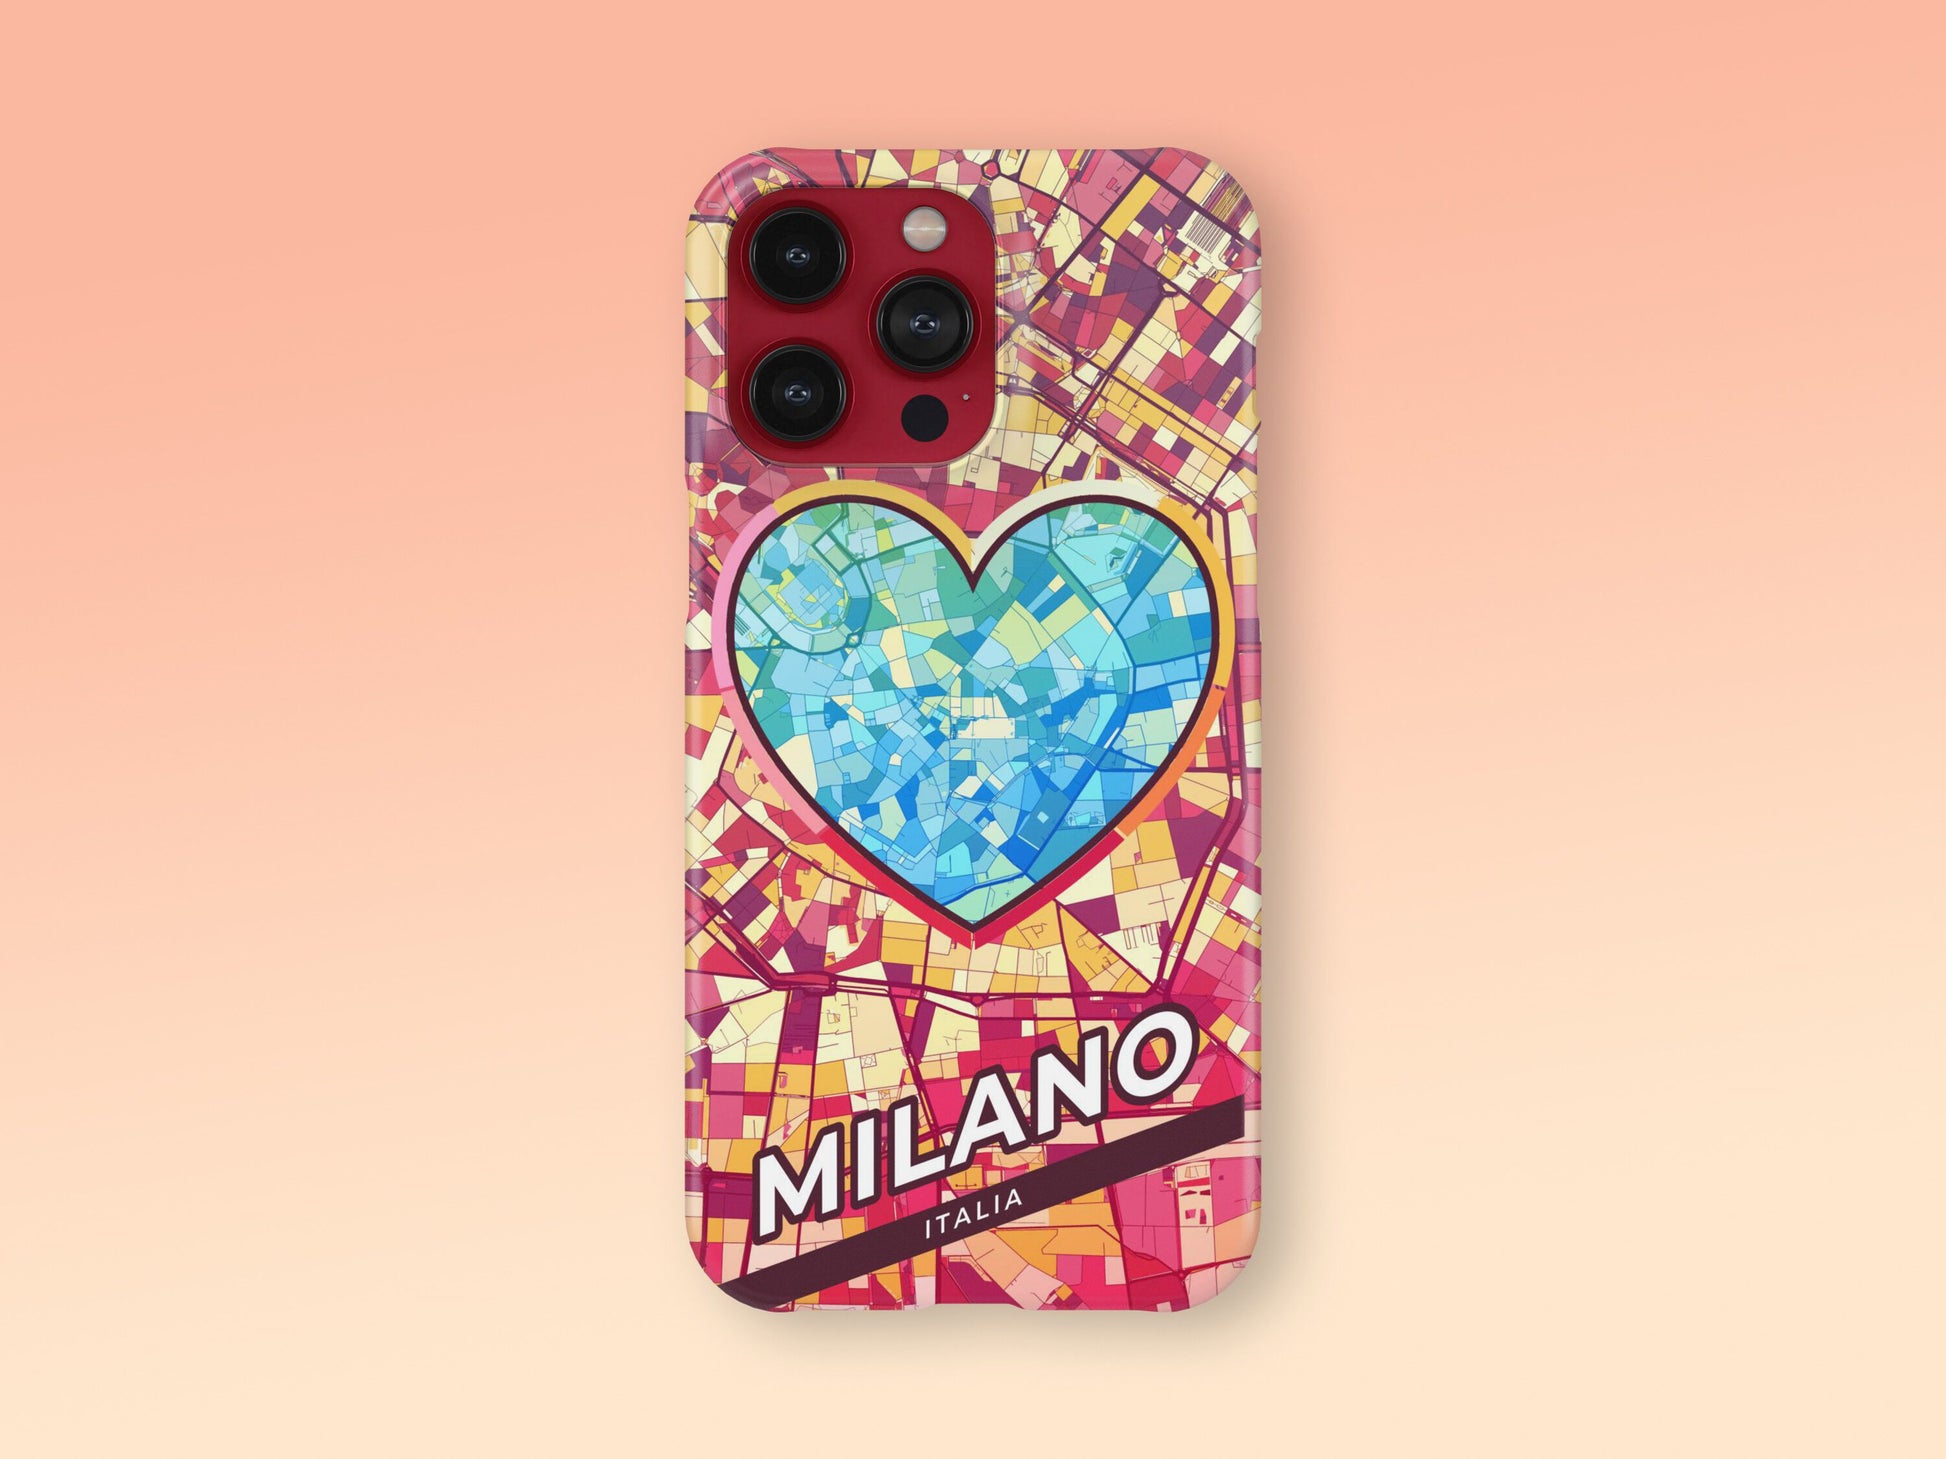 Milan Italy slim phone case with colorful icon 2